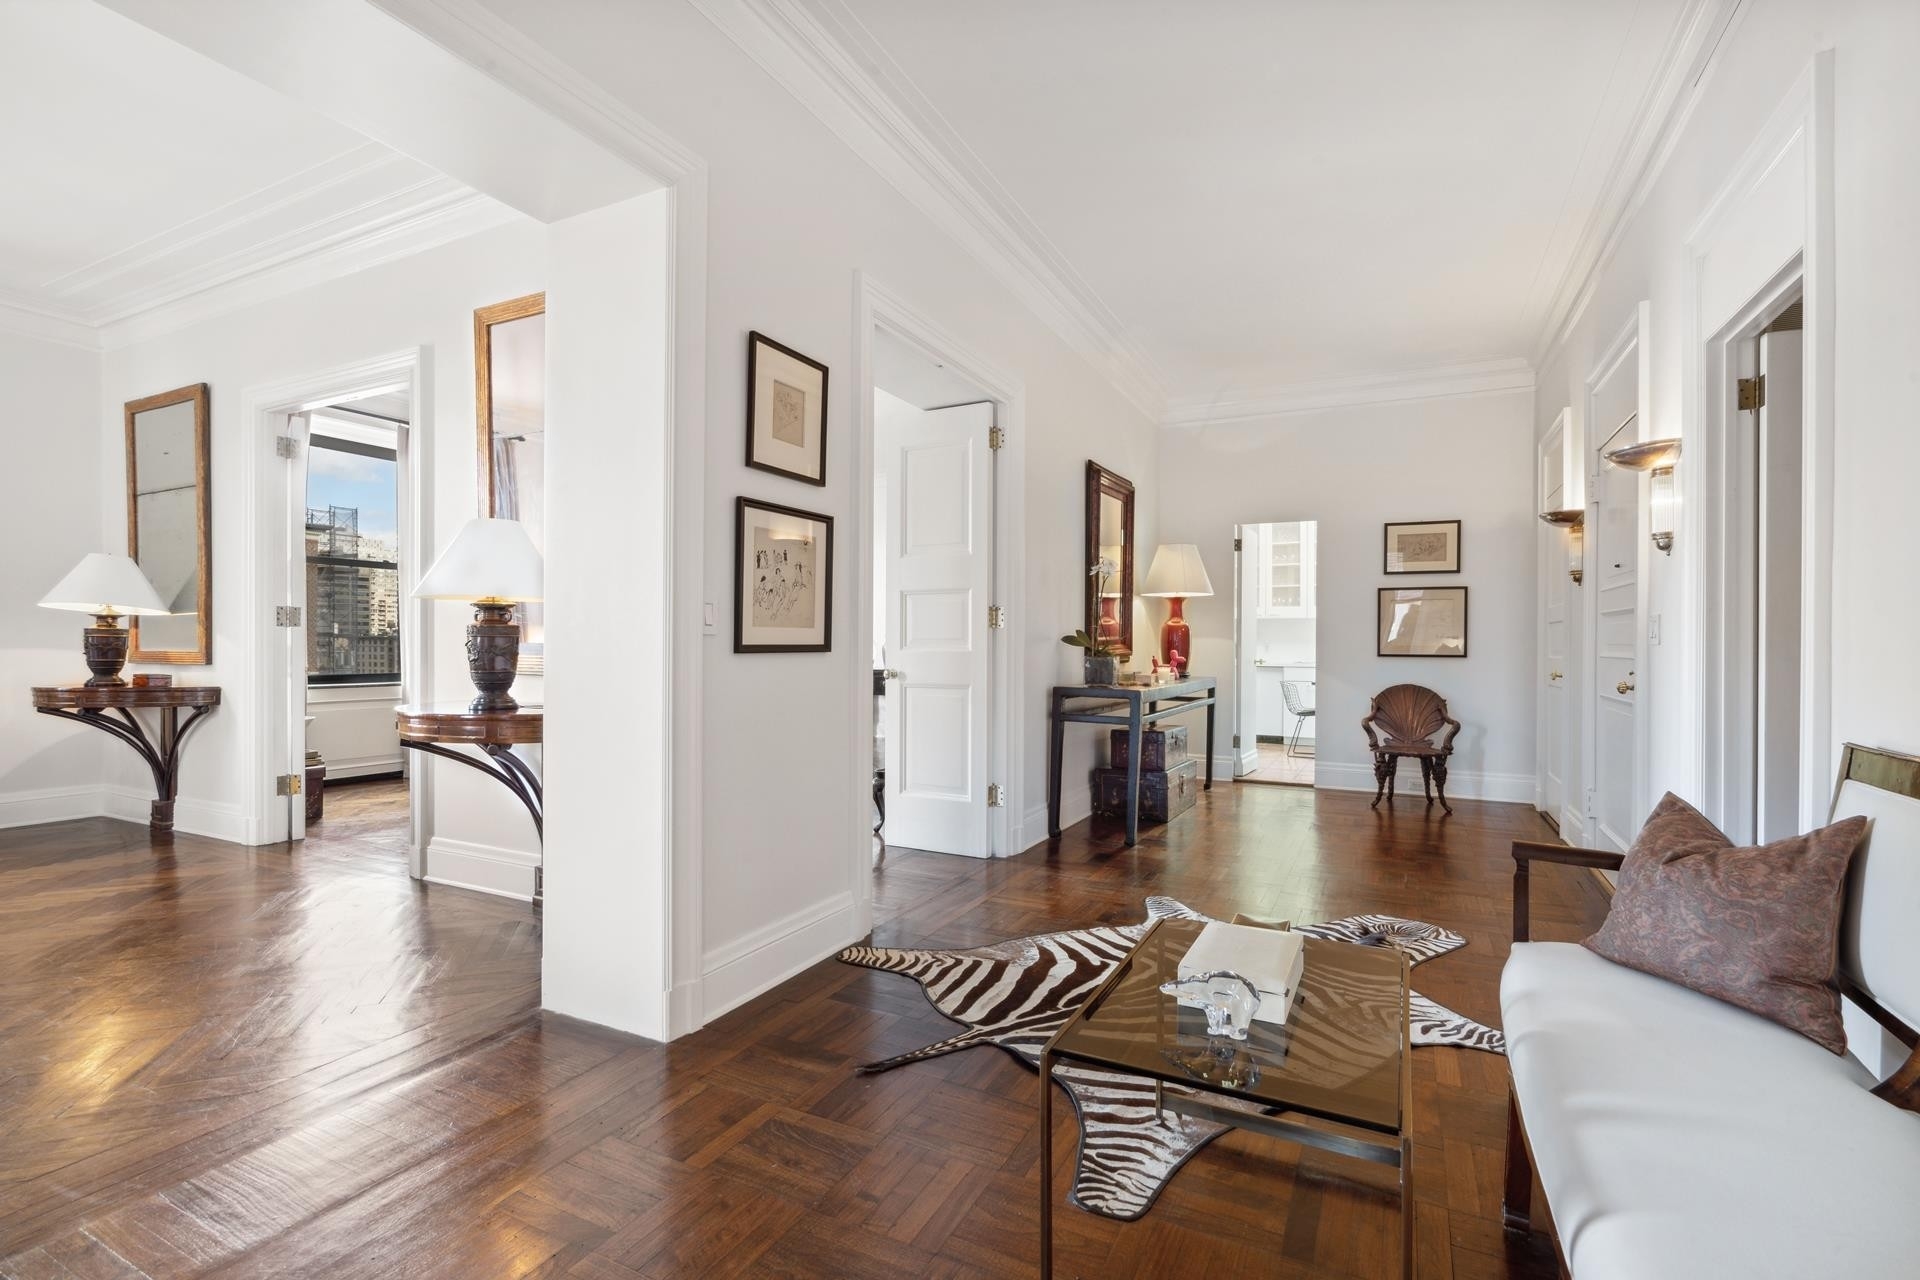 Co-op Properties for Sale at 550 PARK AVE, 11W Lenox Hill, New York, New York 10065